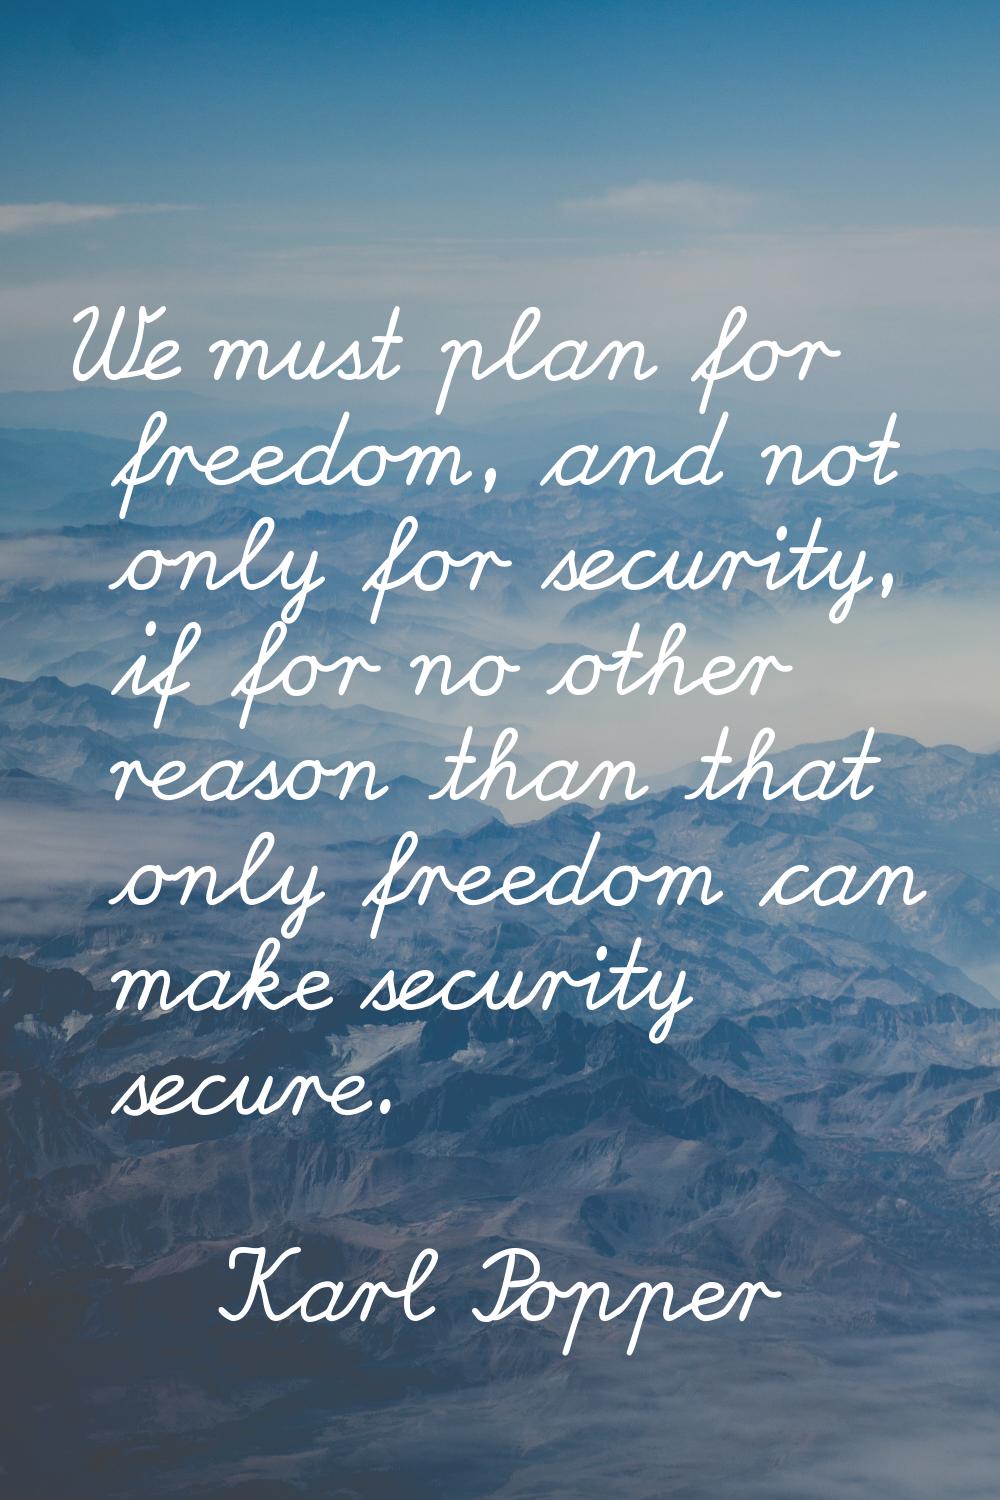 We must plan for freedom, and not only for security, if for no other reason than that only freedom 